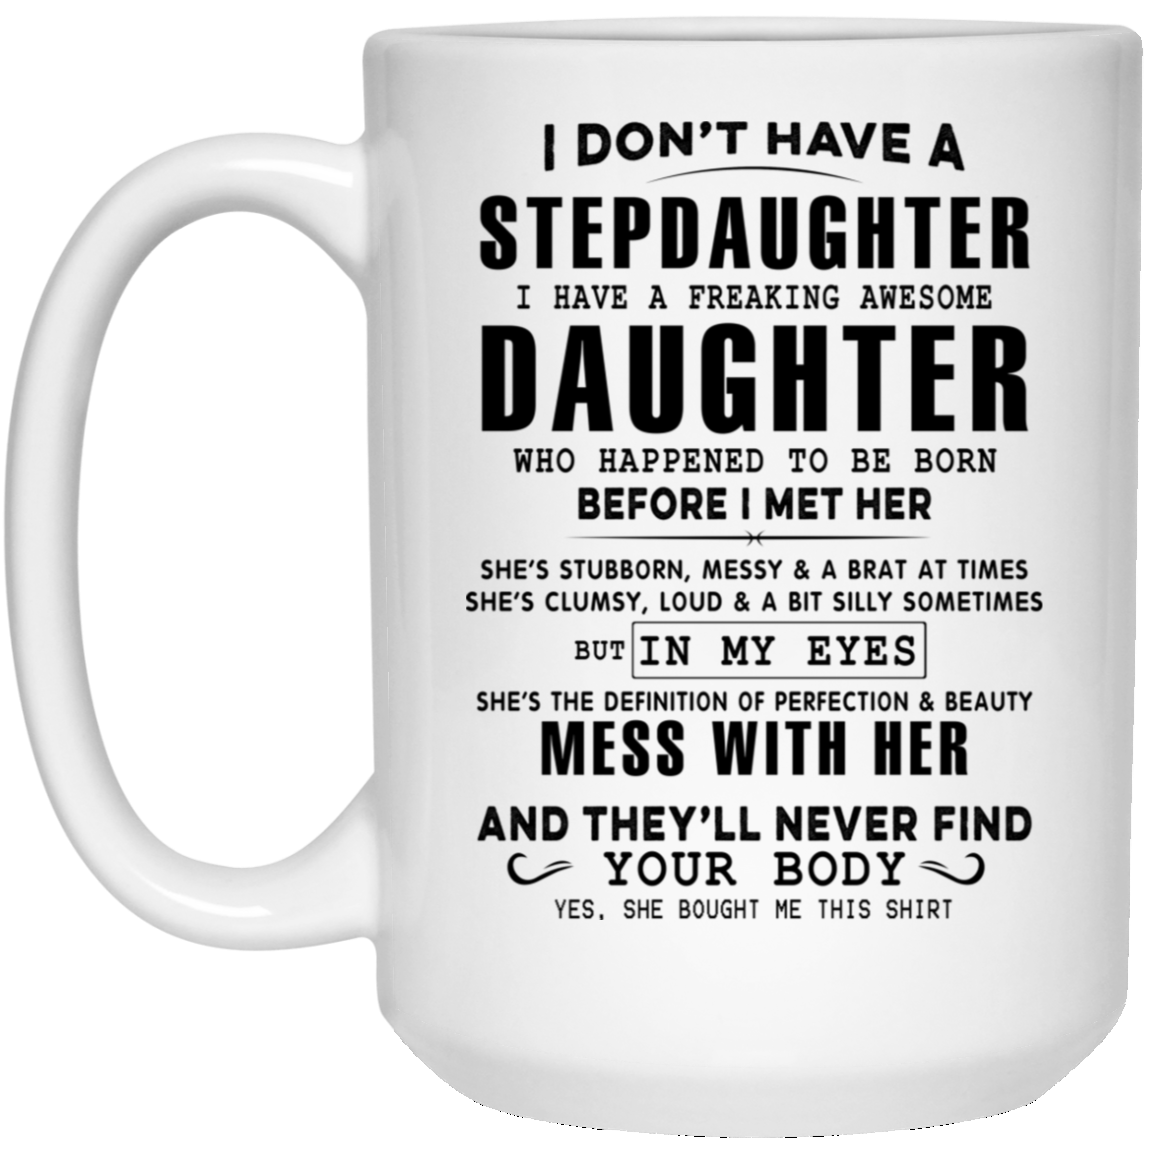 Stepdaughter 12oz Camper Mug from Father Stepdaughter Here's a Silly Mug to Remind You of Just how Awesome You Are Gag Stepdaughter Gifts